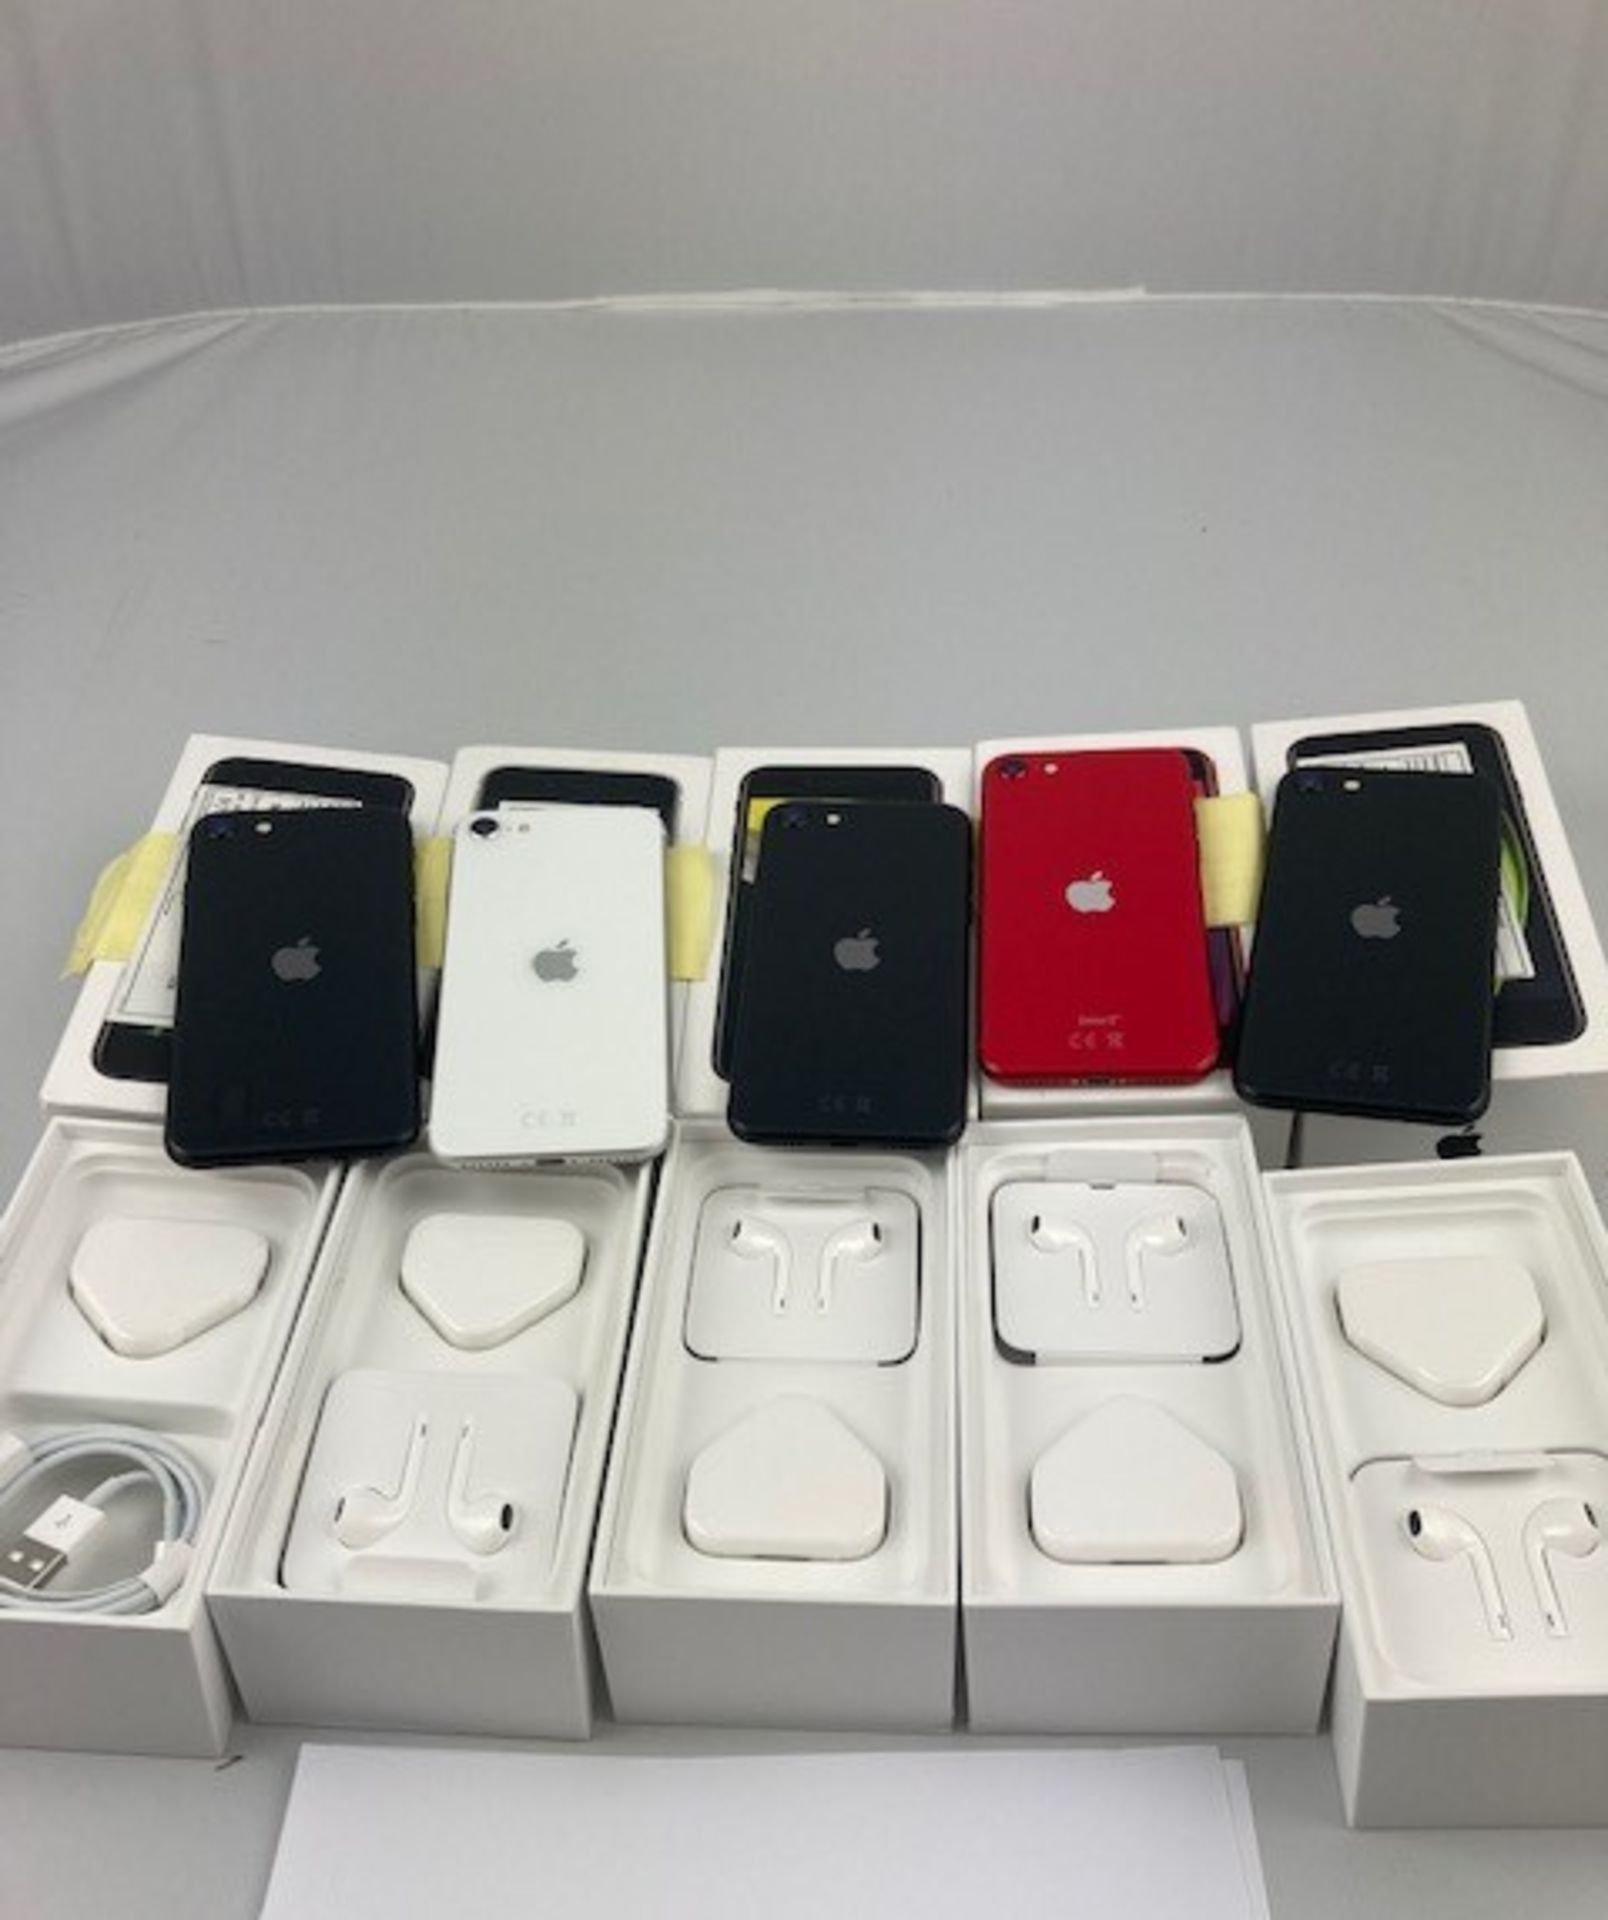 Box of 5 Apple Iphones. Latest selling price £2045.00*